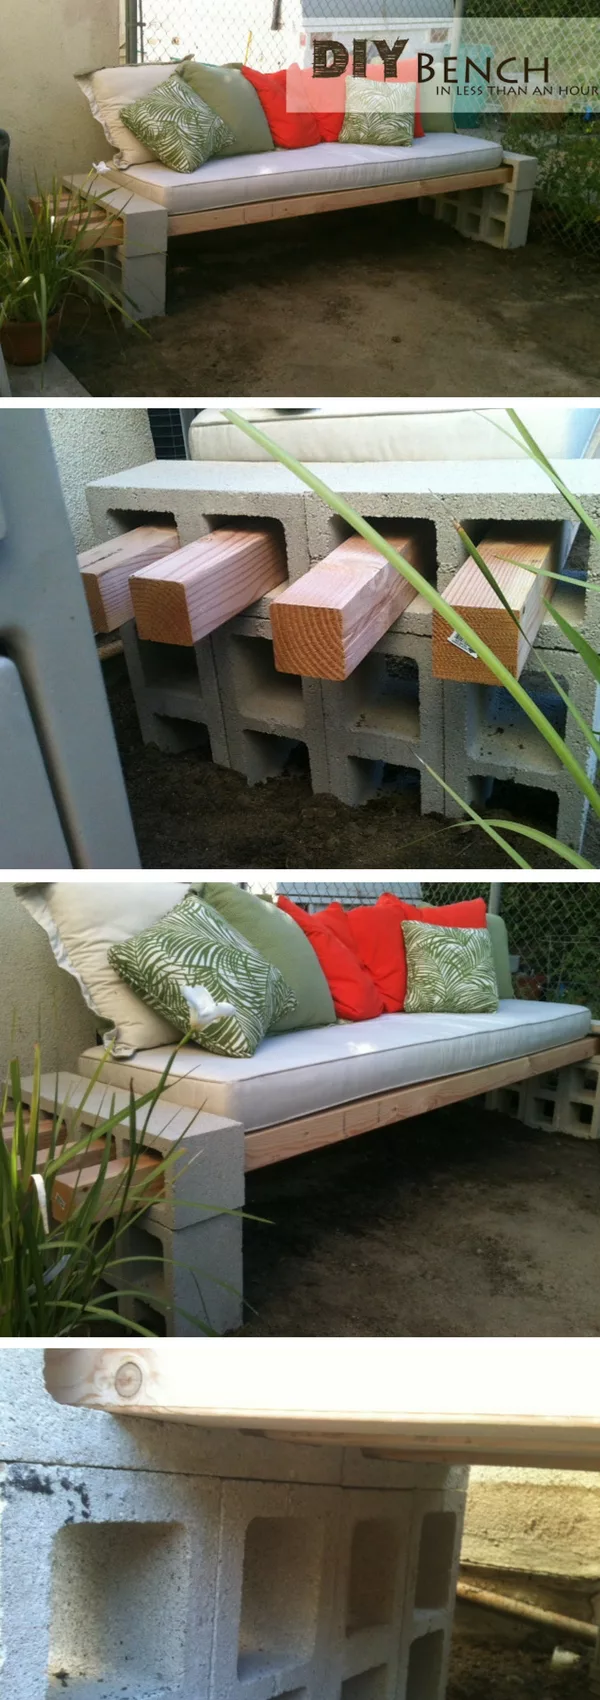 Check out how to build a quick and easy DIY bench for the outdoors